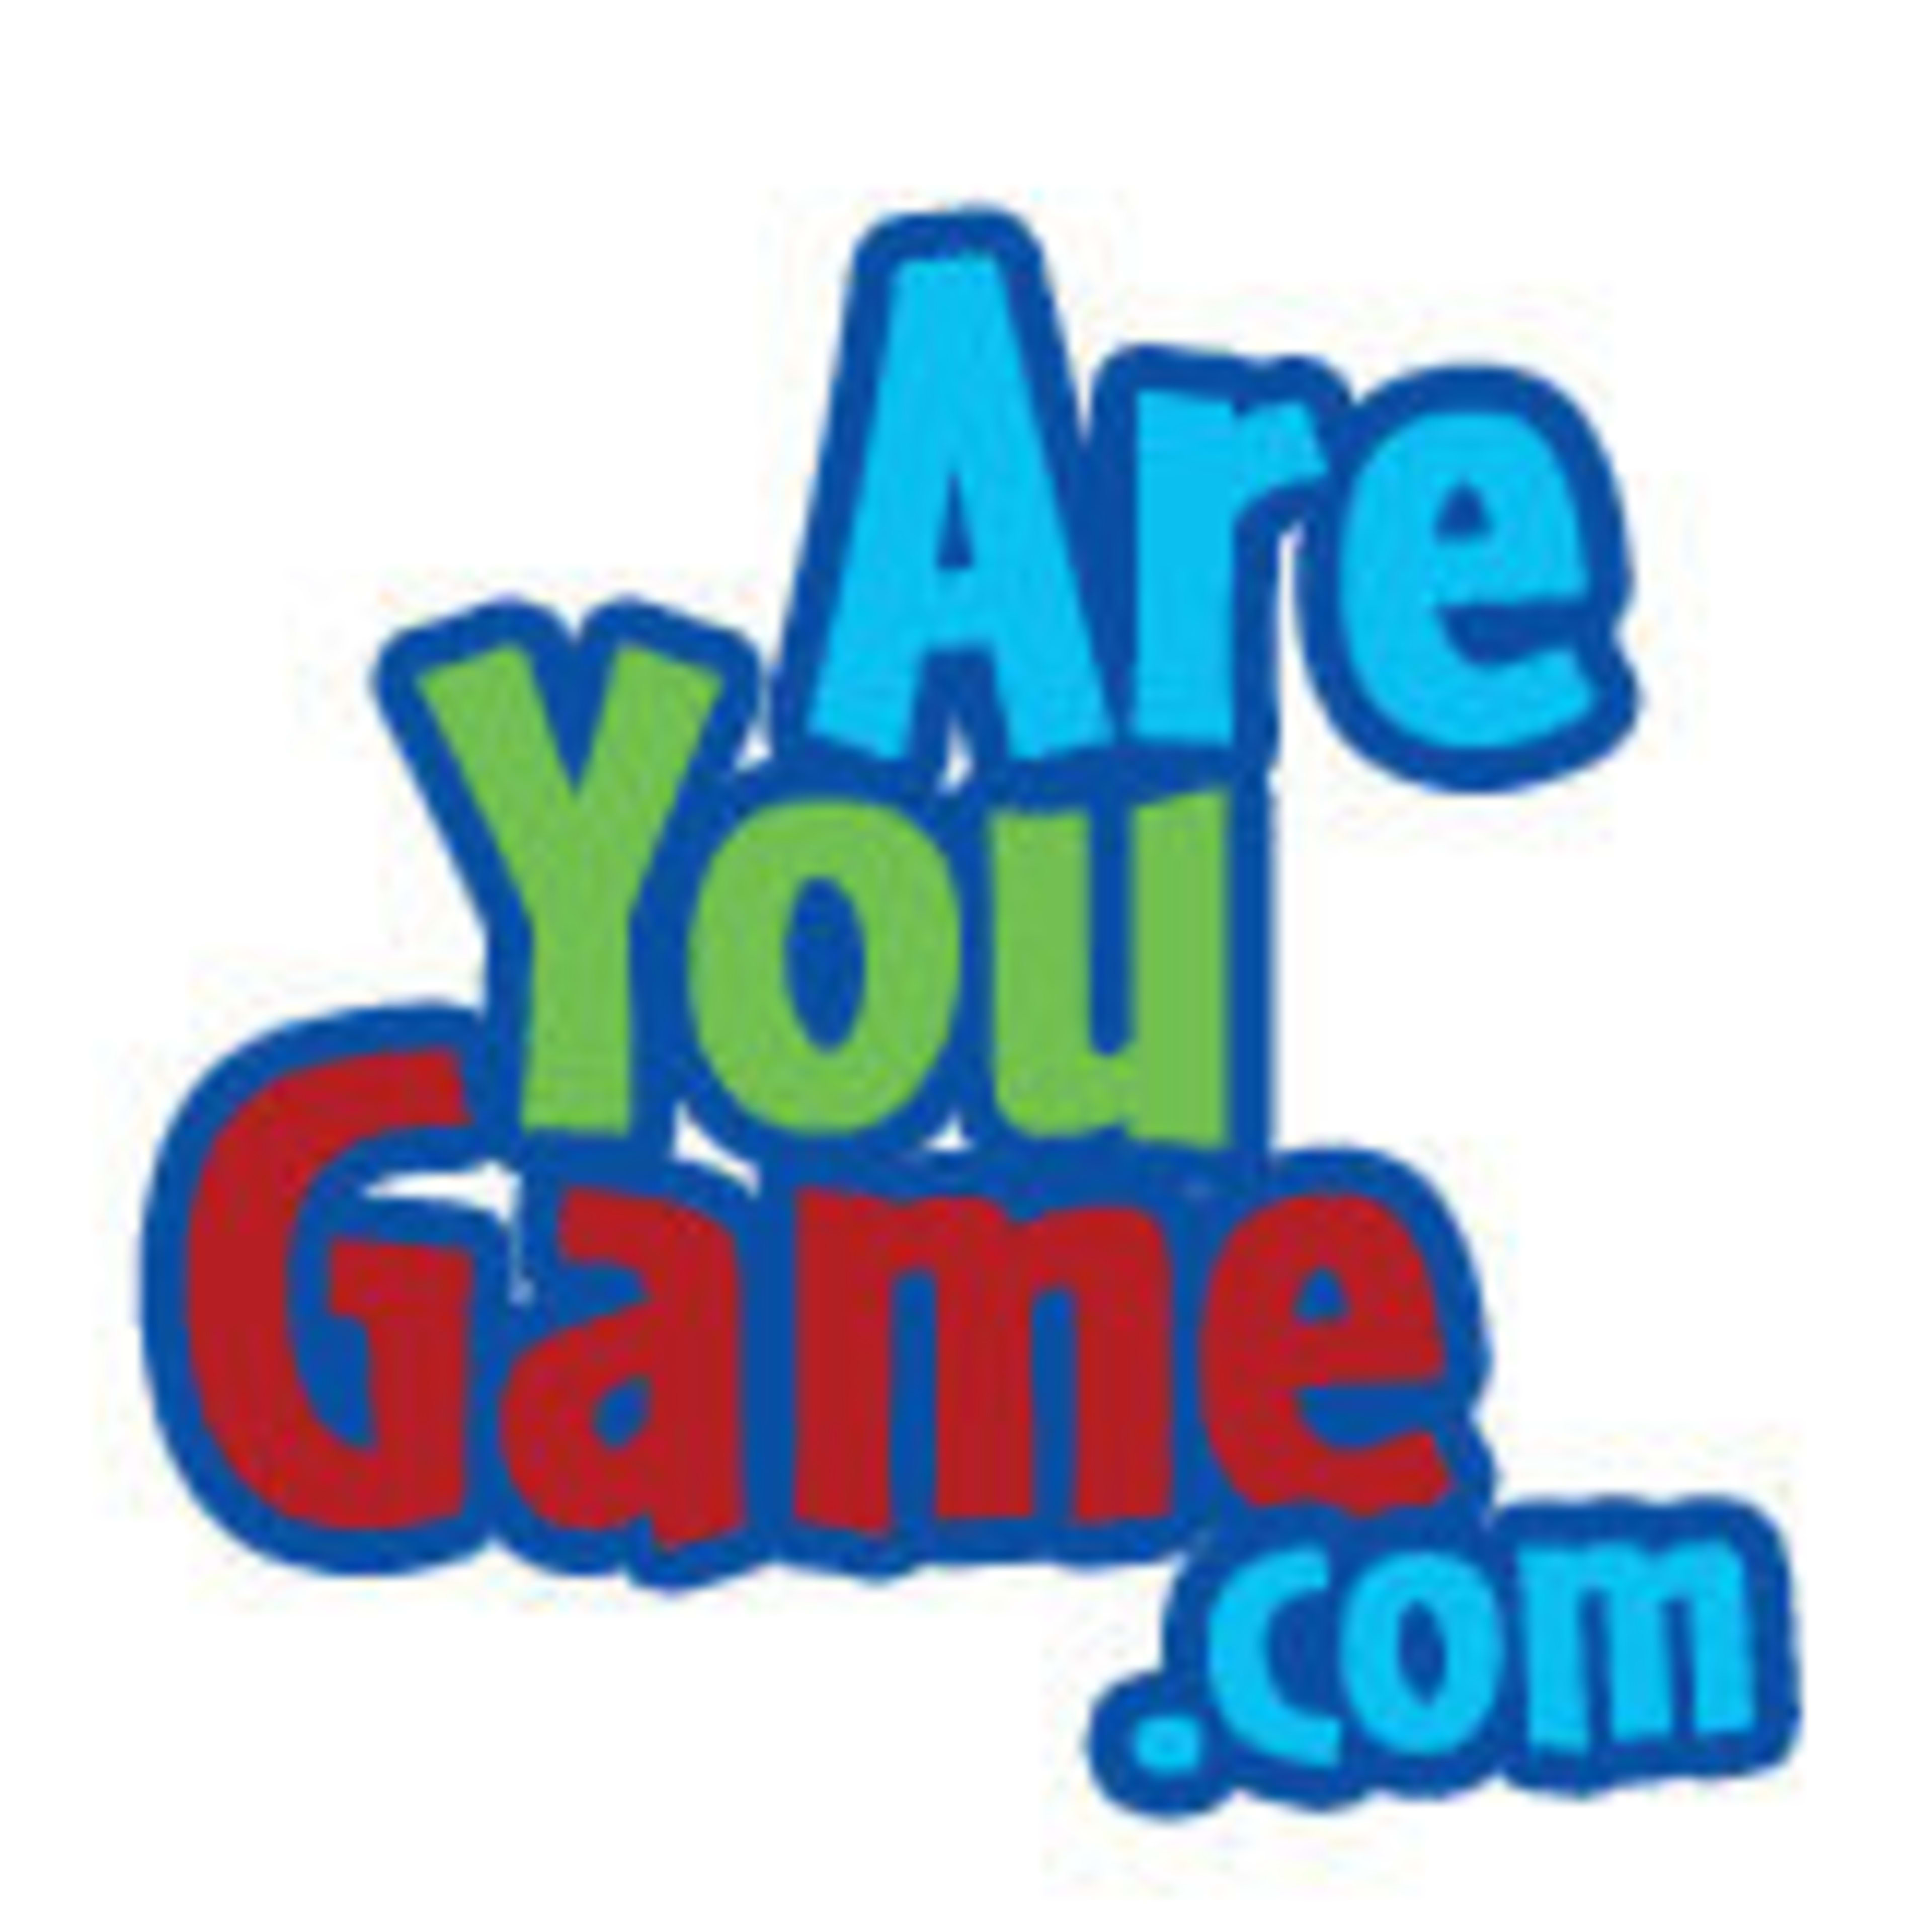 Are You Game Code